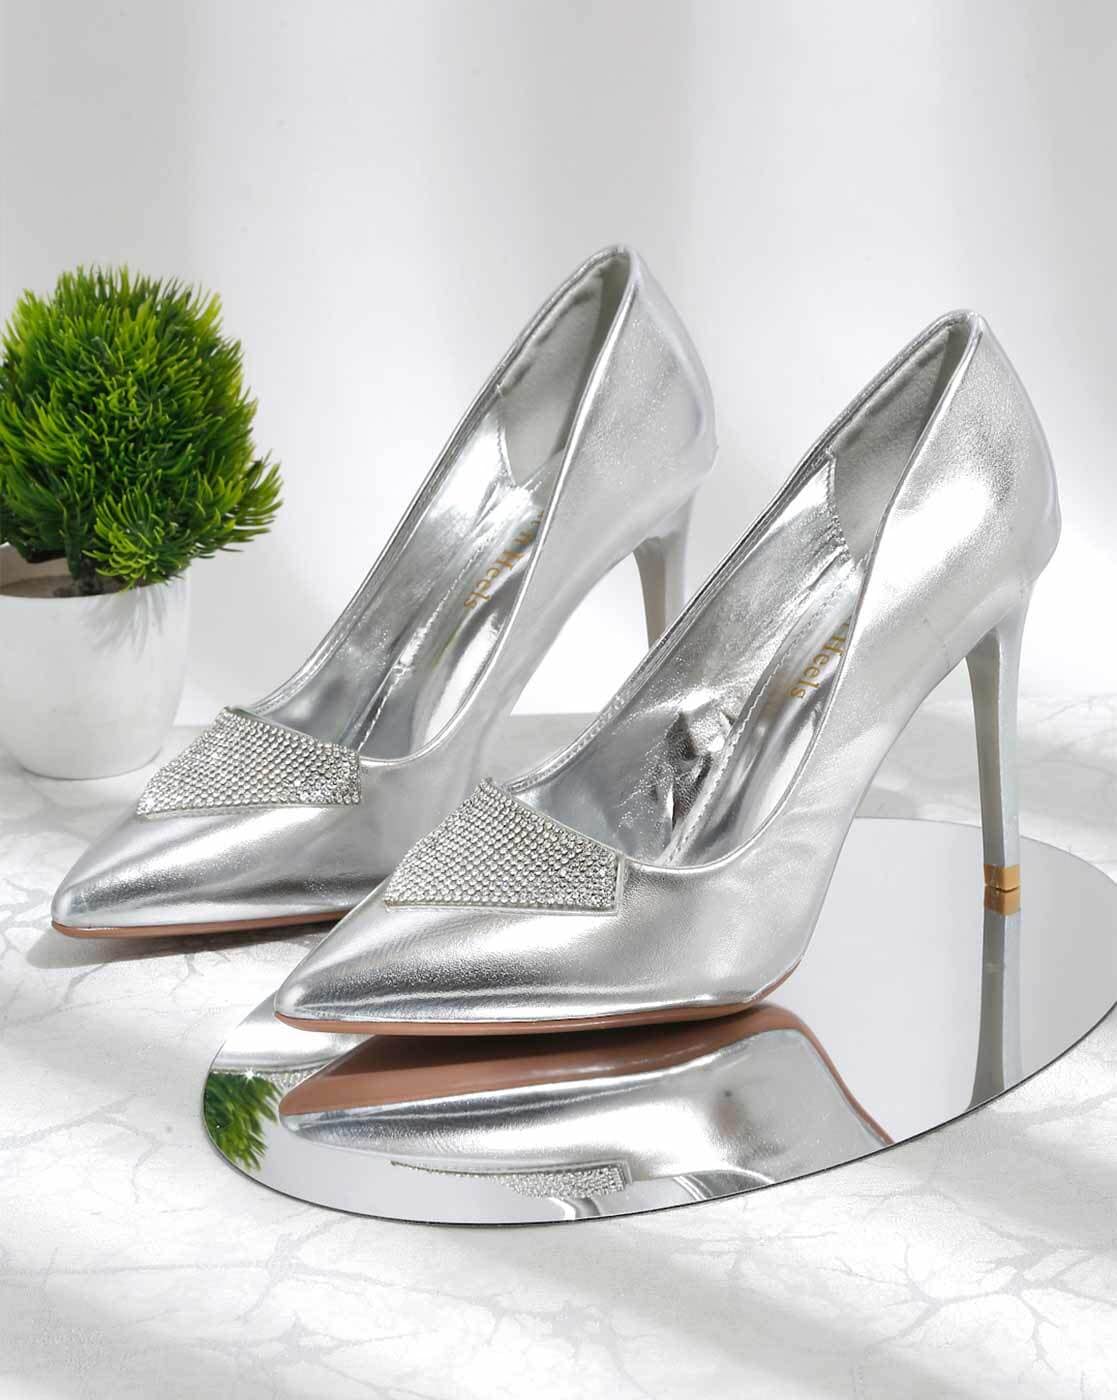 Nite-Out mirrored leather pumps in silver - Valentino Garavani | Mytheresa